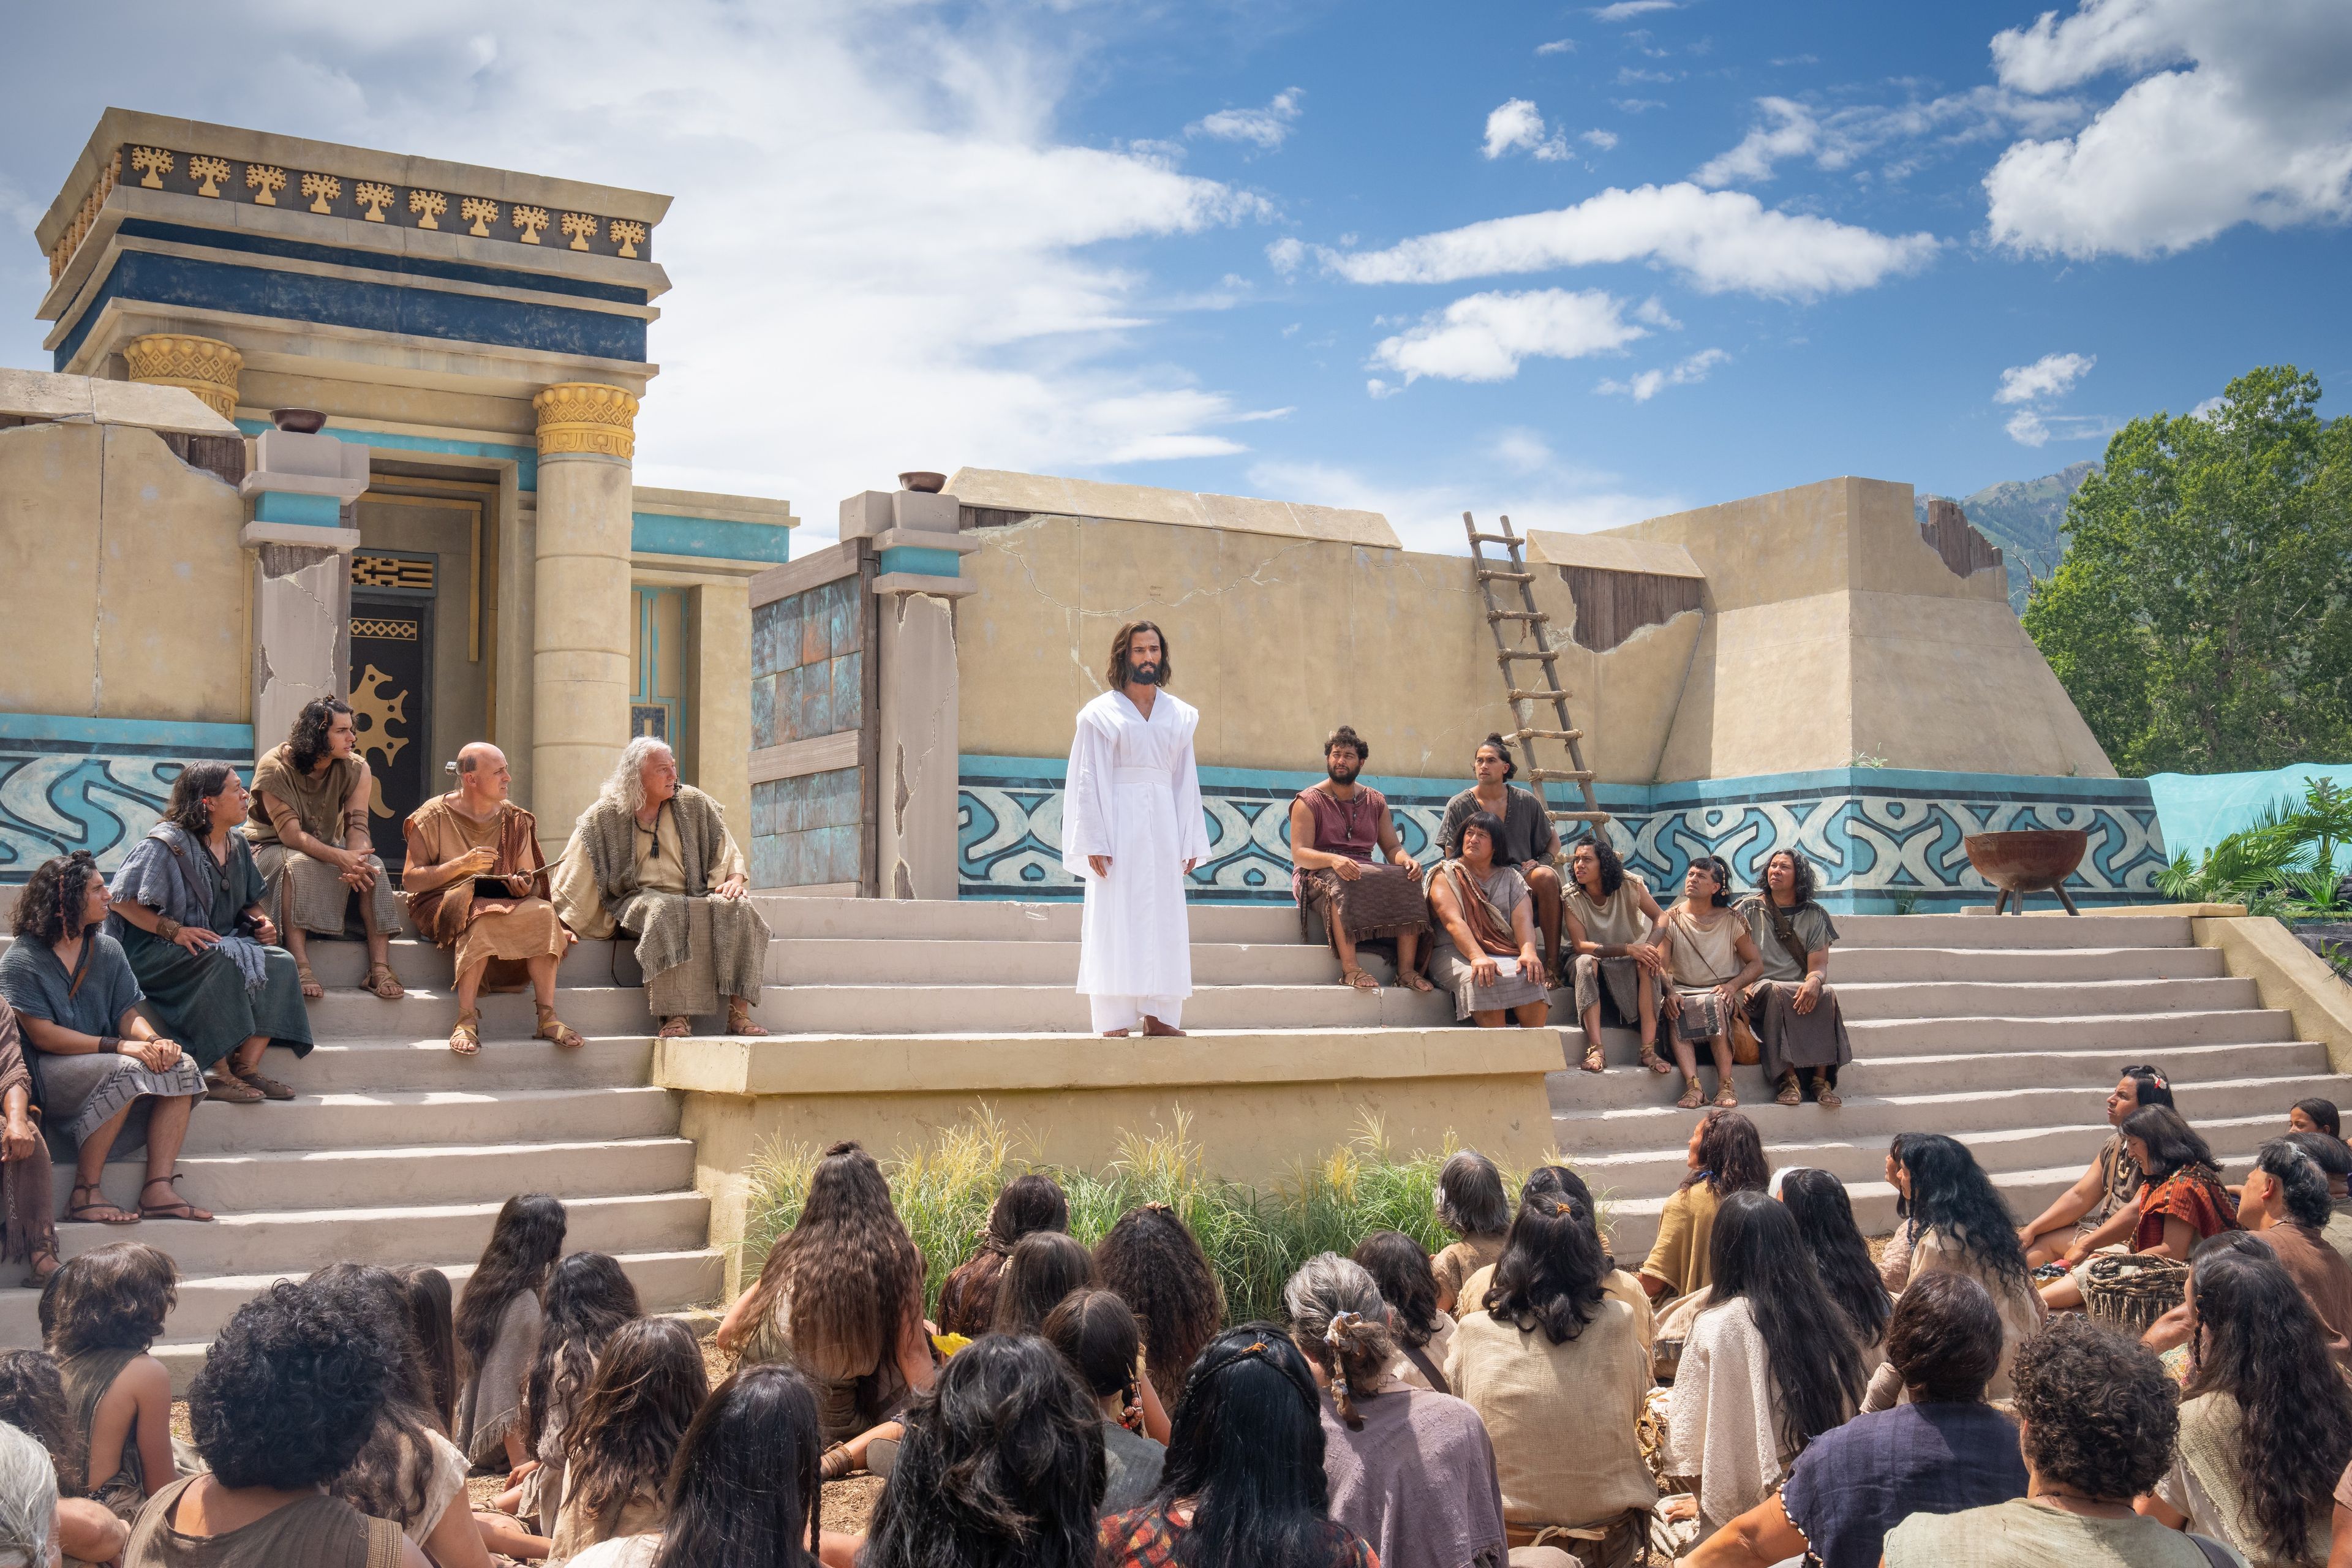 Jesus Christ teaches that He will return to the Father, but then invites all to come to be healed. He teaches the Nephites in the City of Bountiful outside the temple.